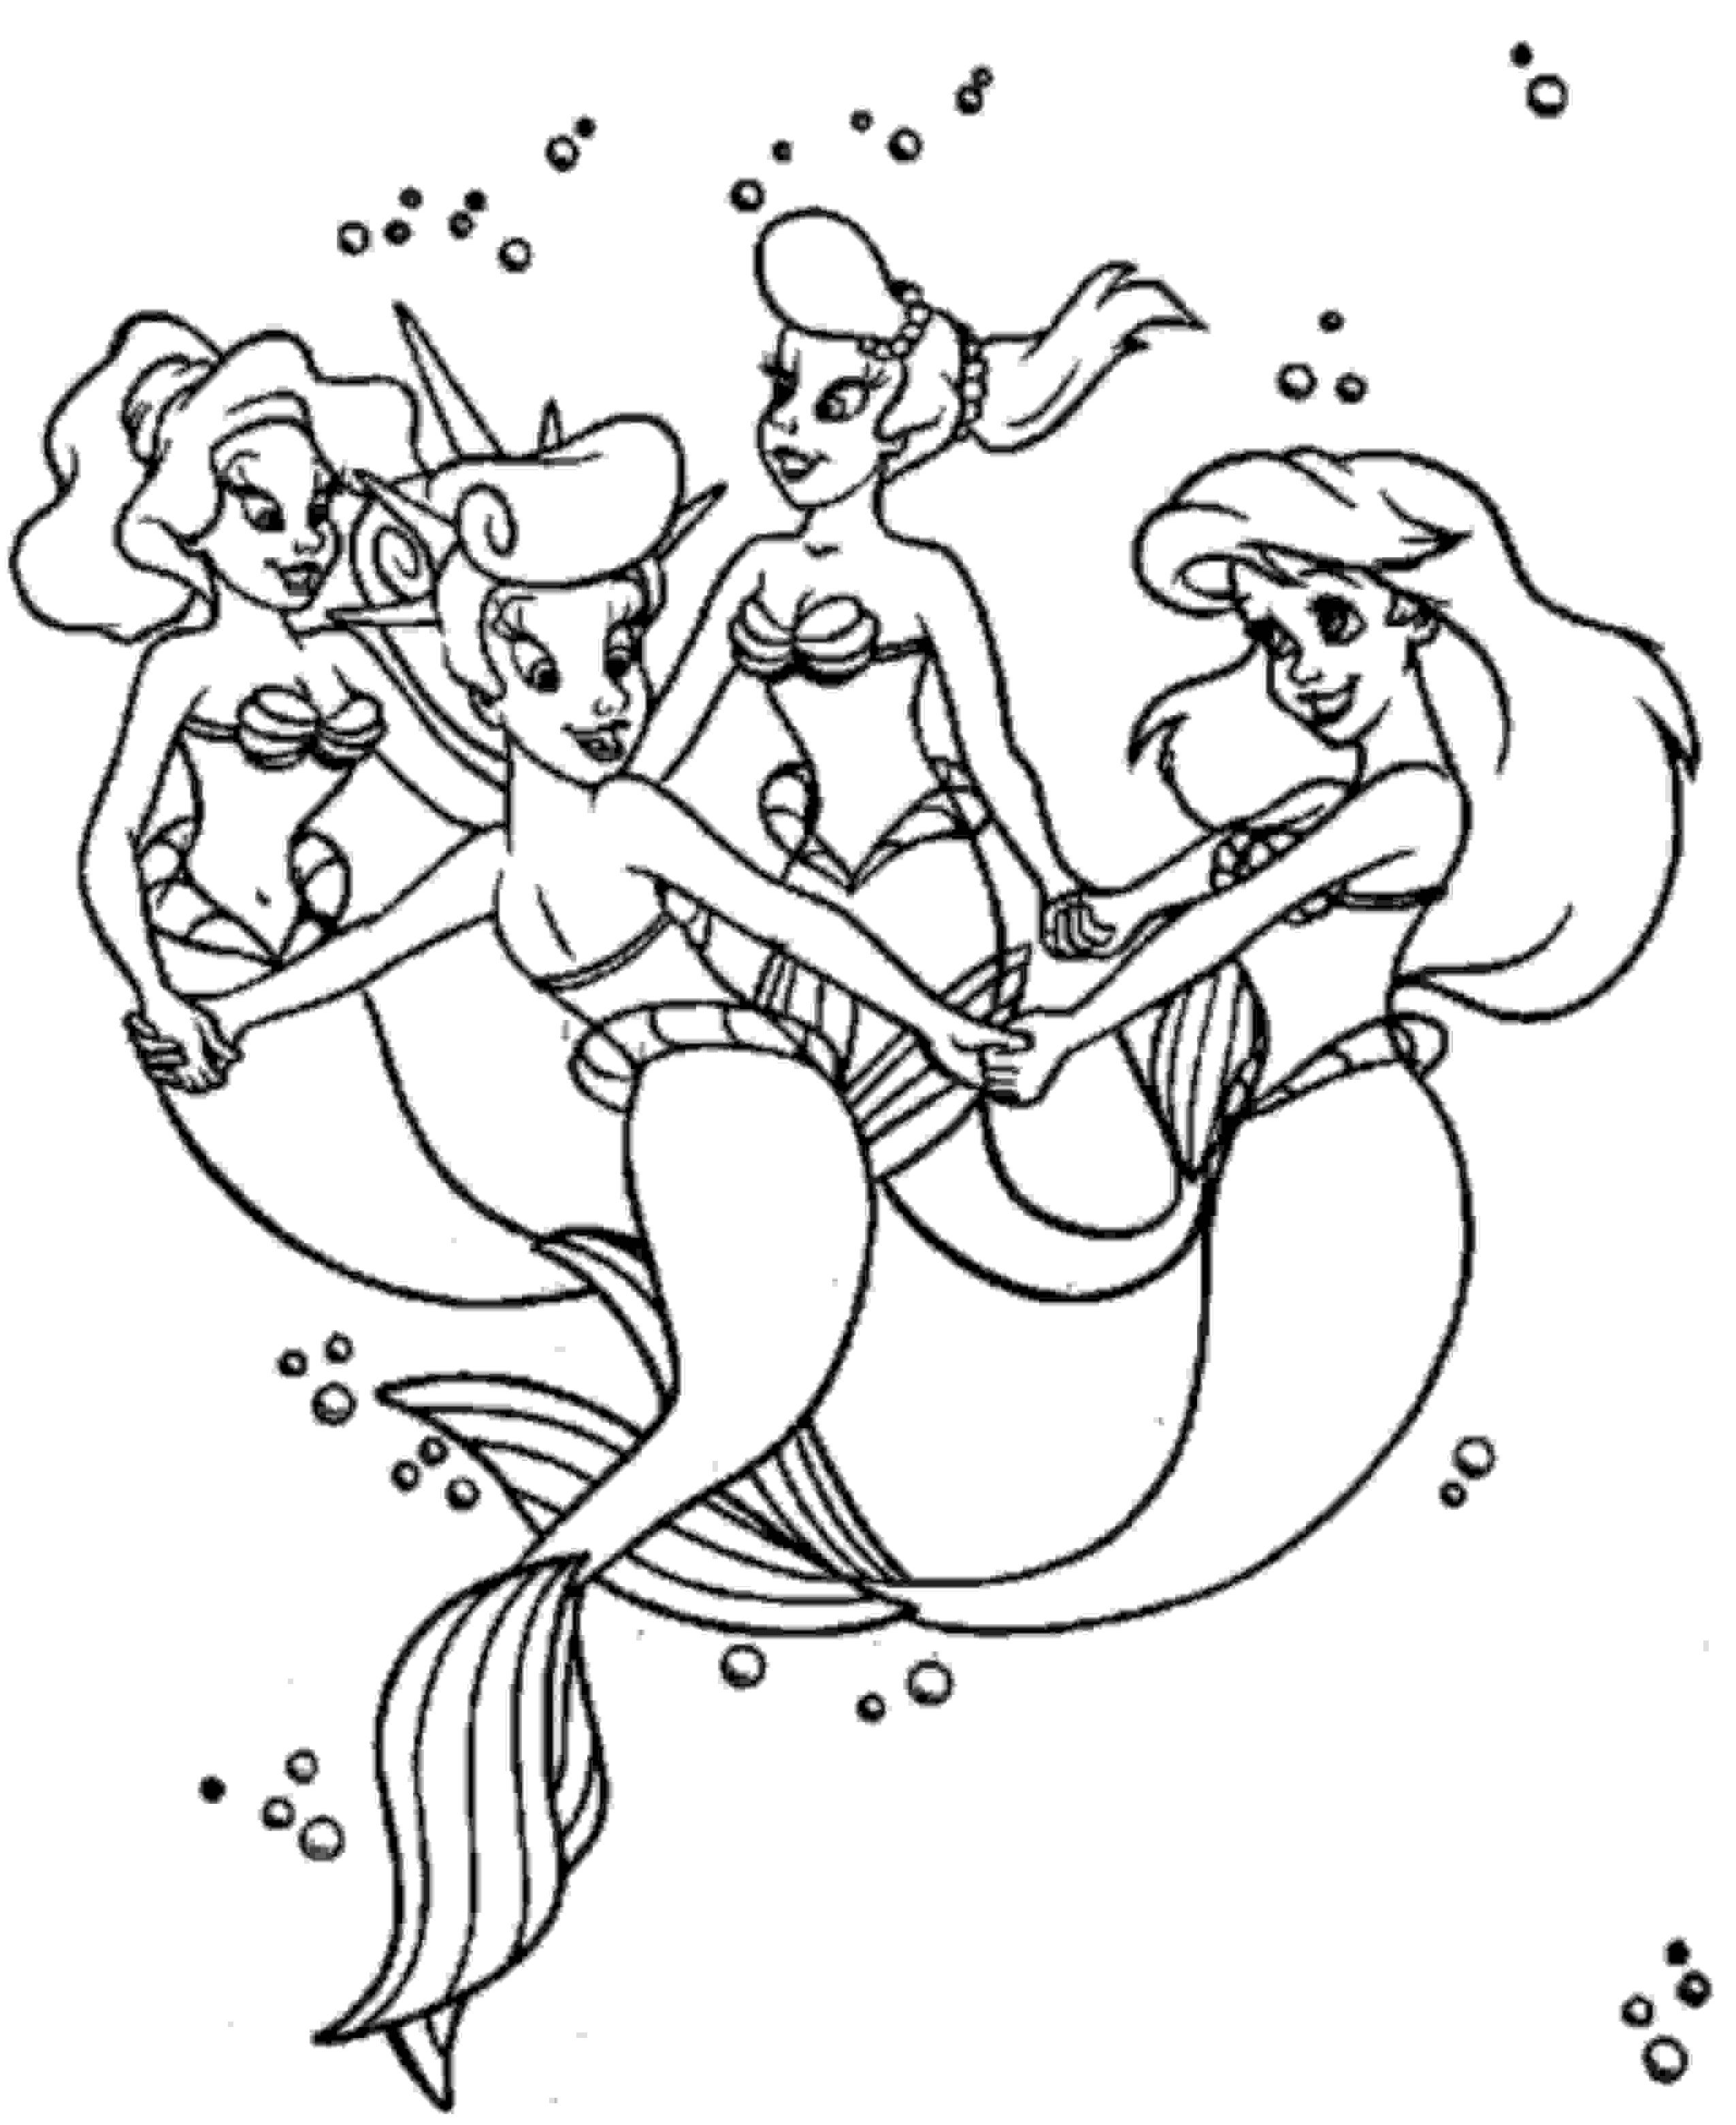 mermaid-coloring-pages-coloring-pages-to-print